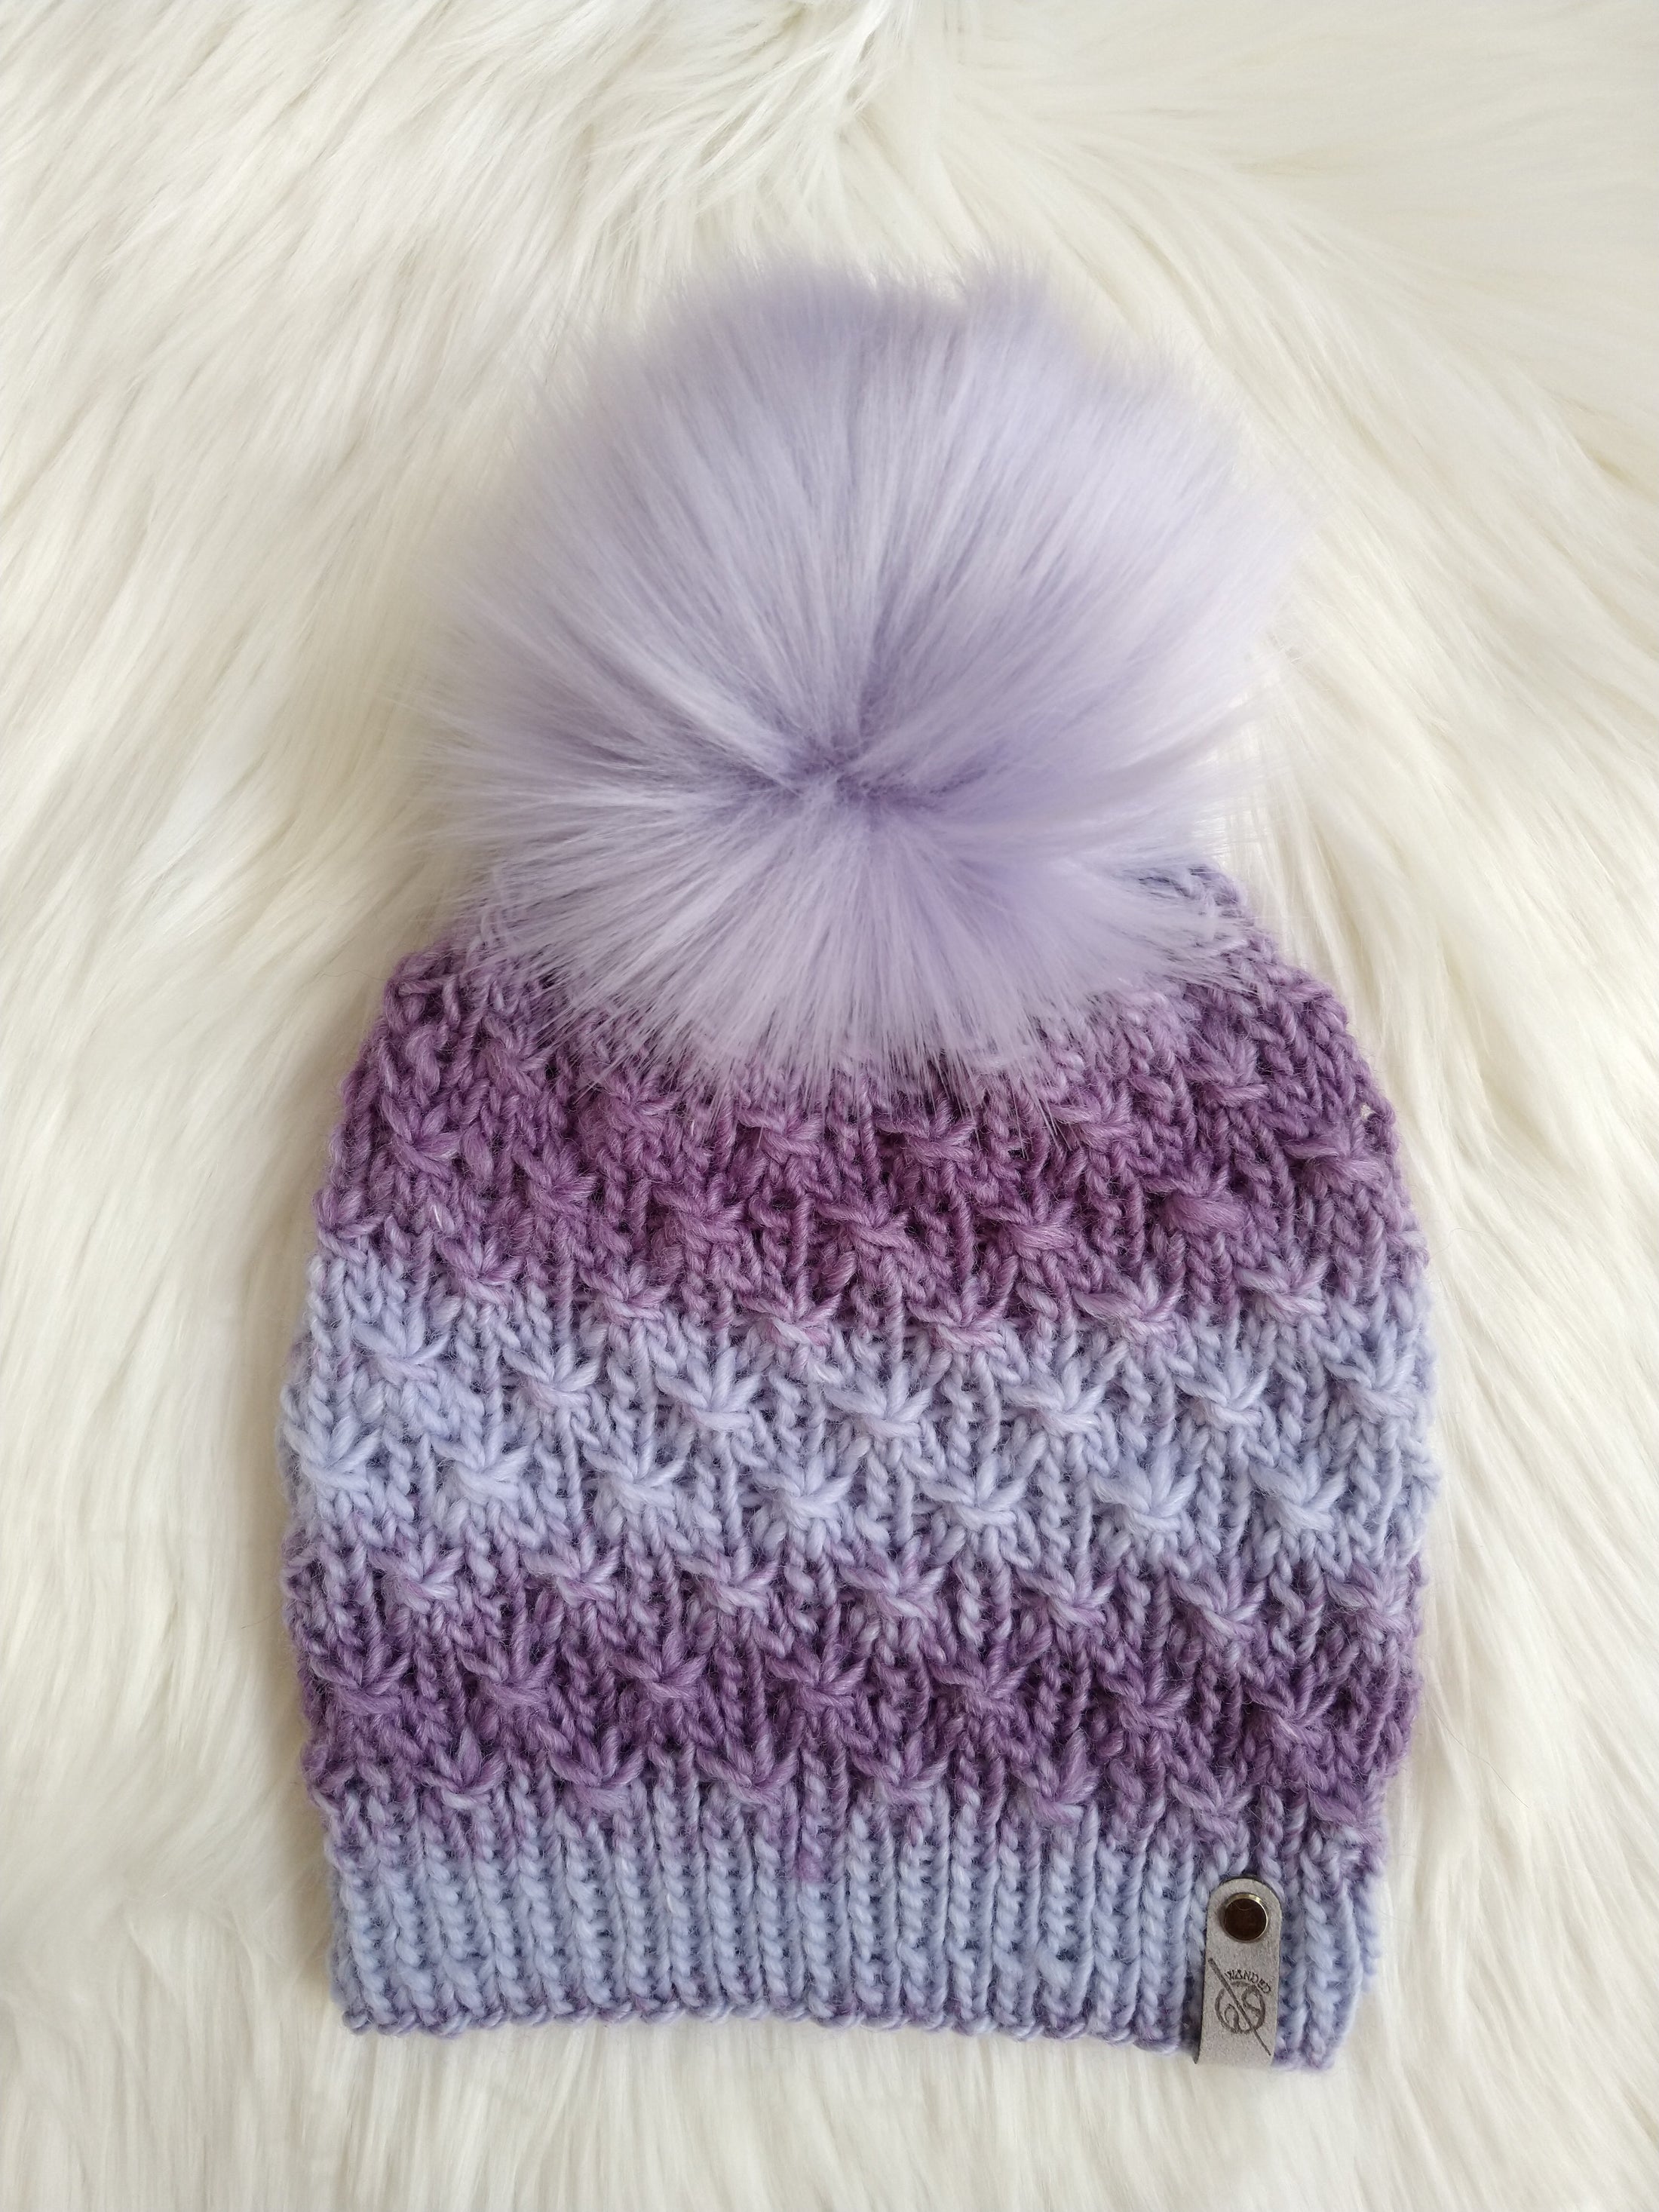 Granger Toque Knitting Pattern – Wanded Knit and Crochet